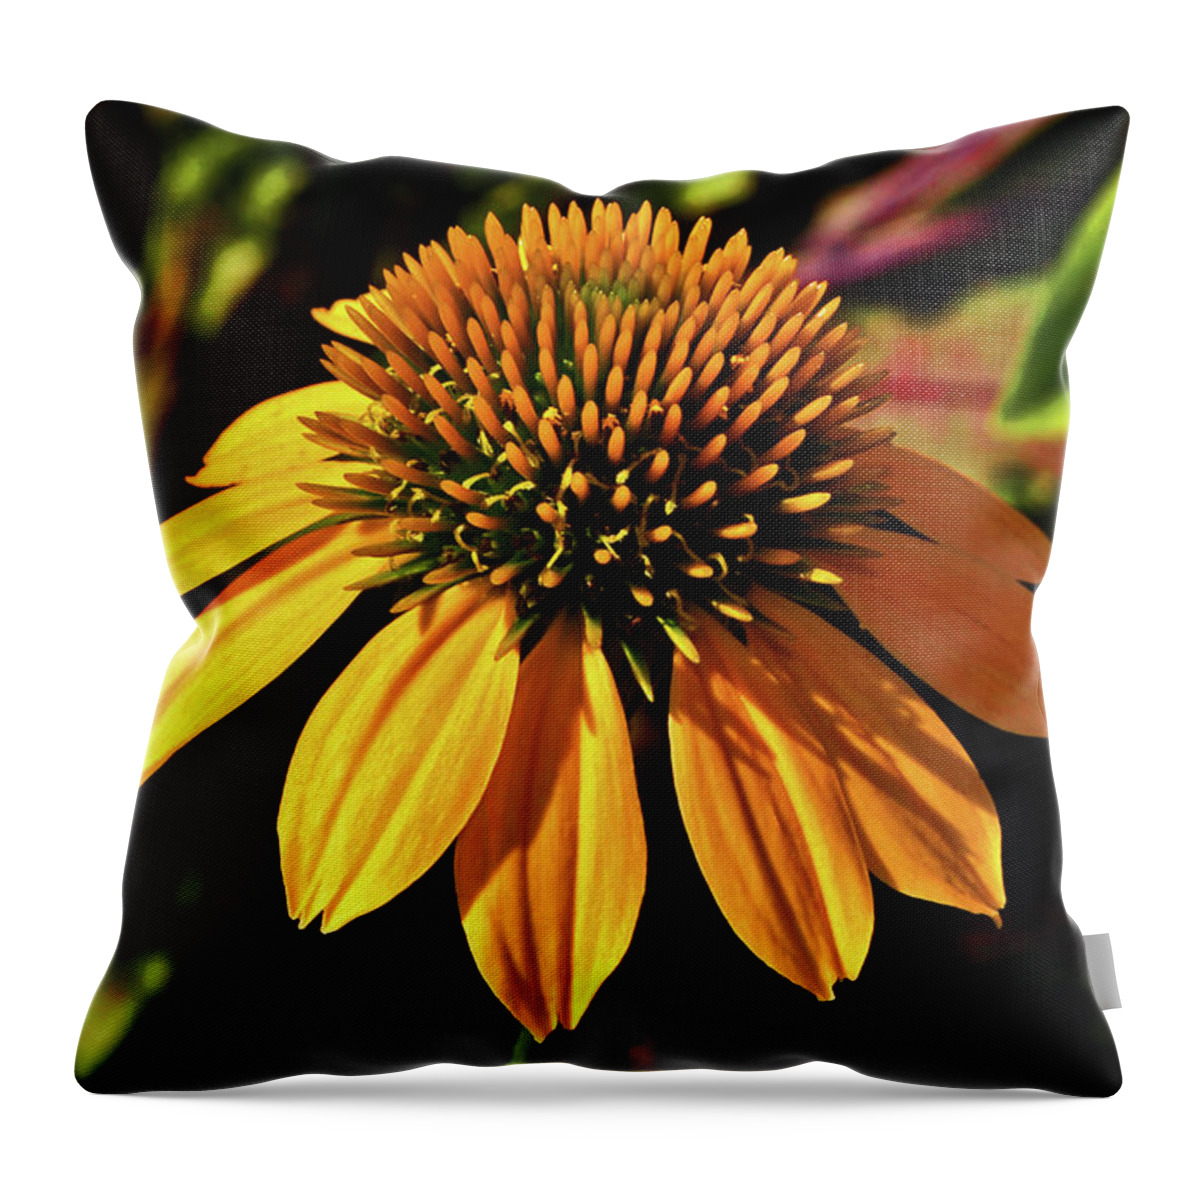 Flower Throw Pillow featuring the photograph Cheyenne Spirit Coneflower - Harvest Moon 001 by George Bostian